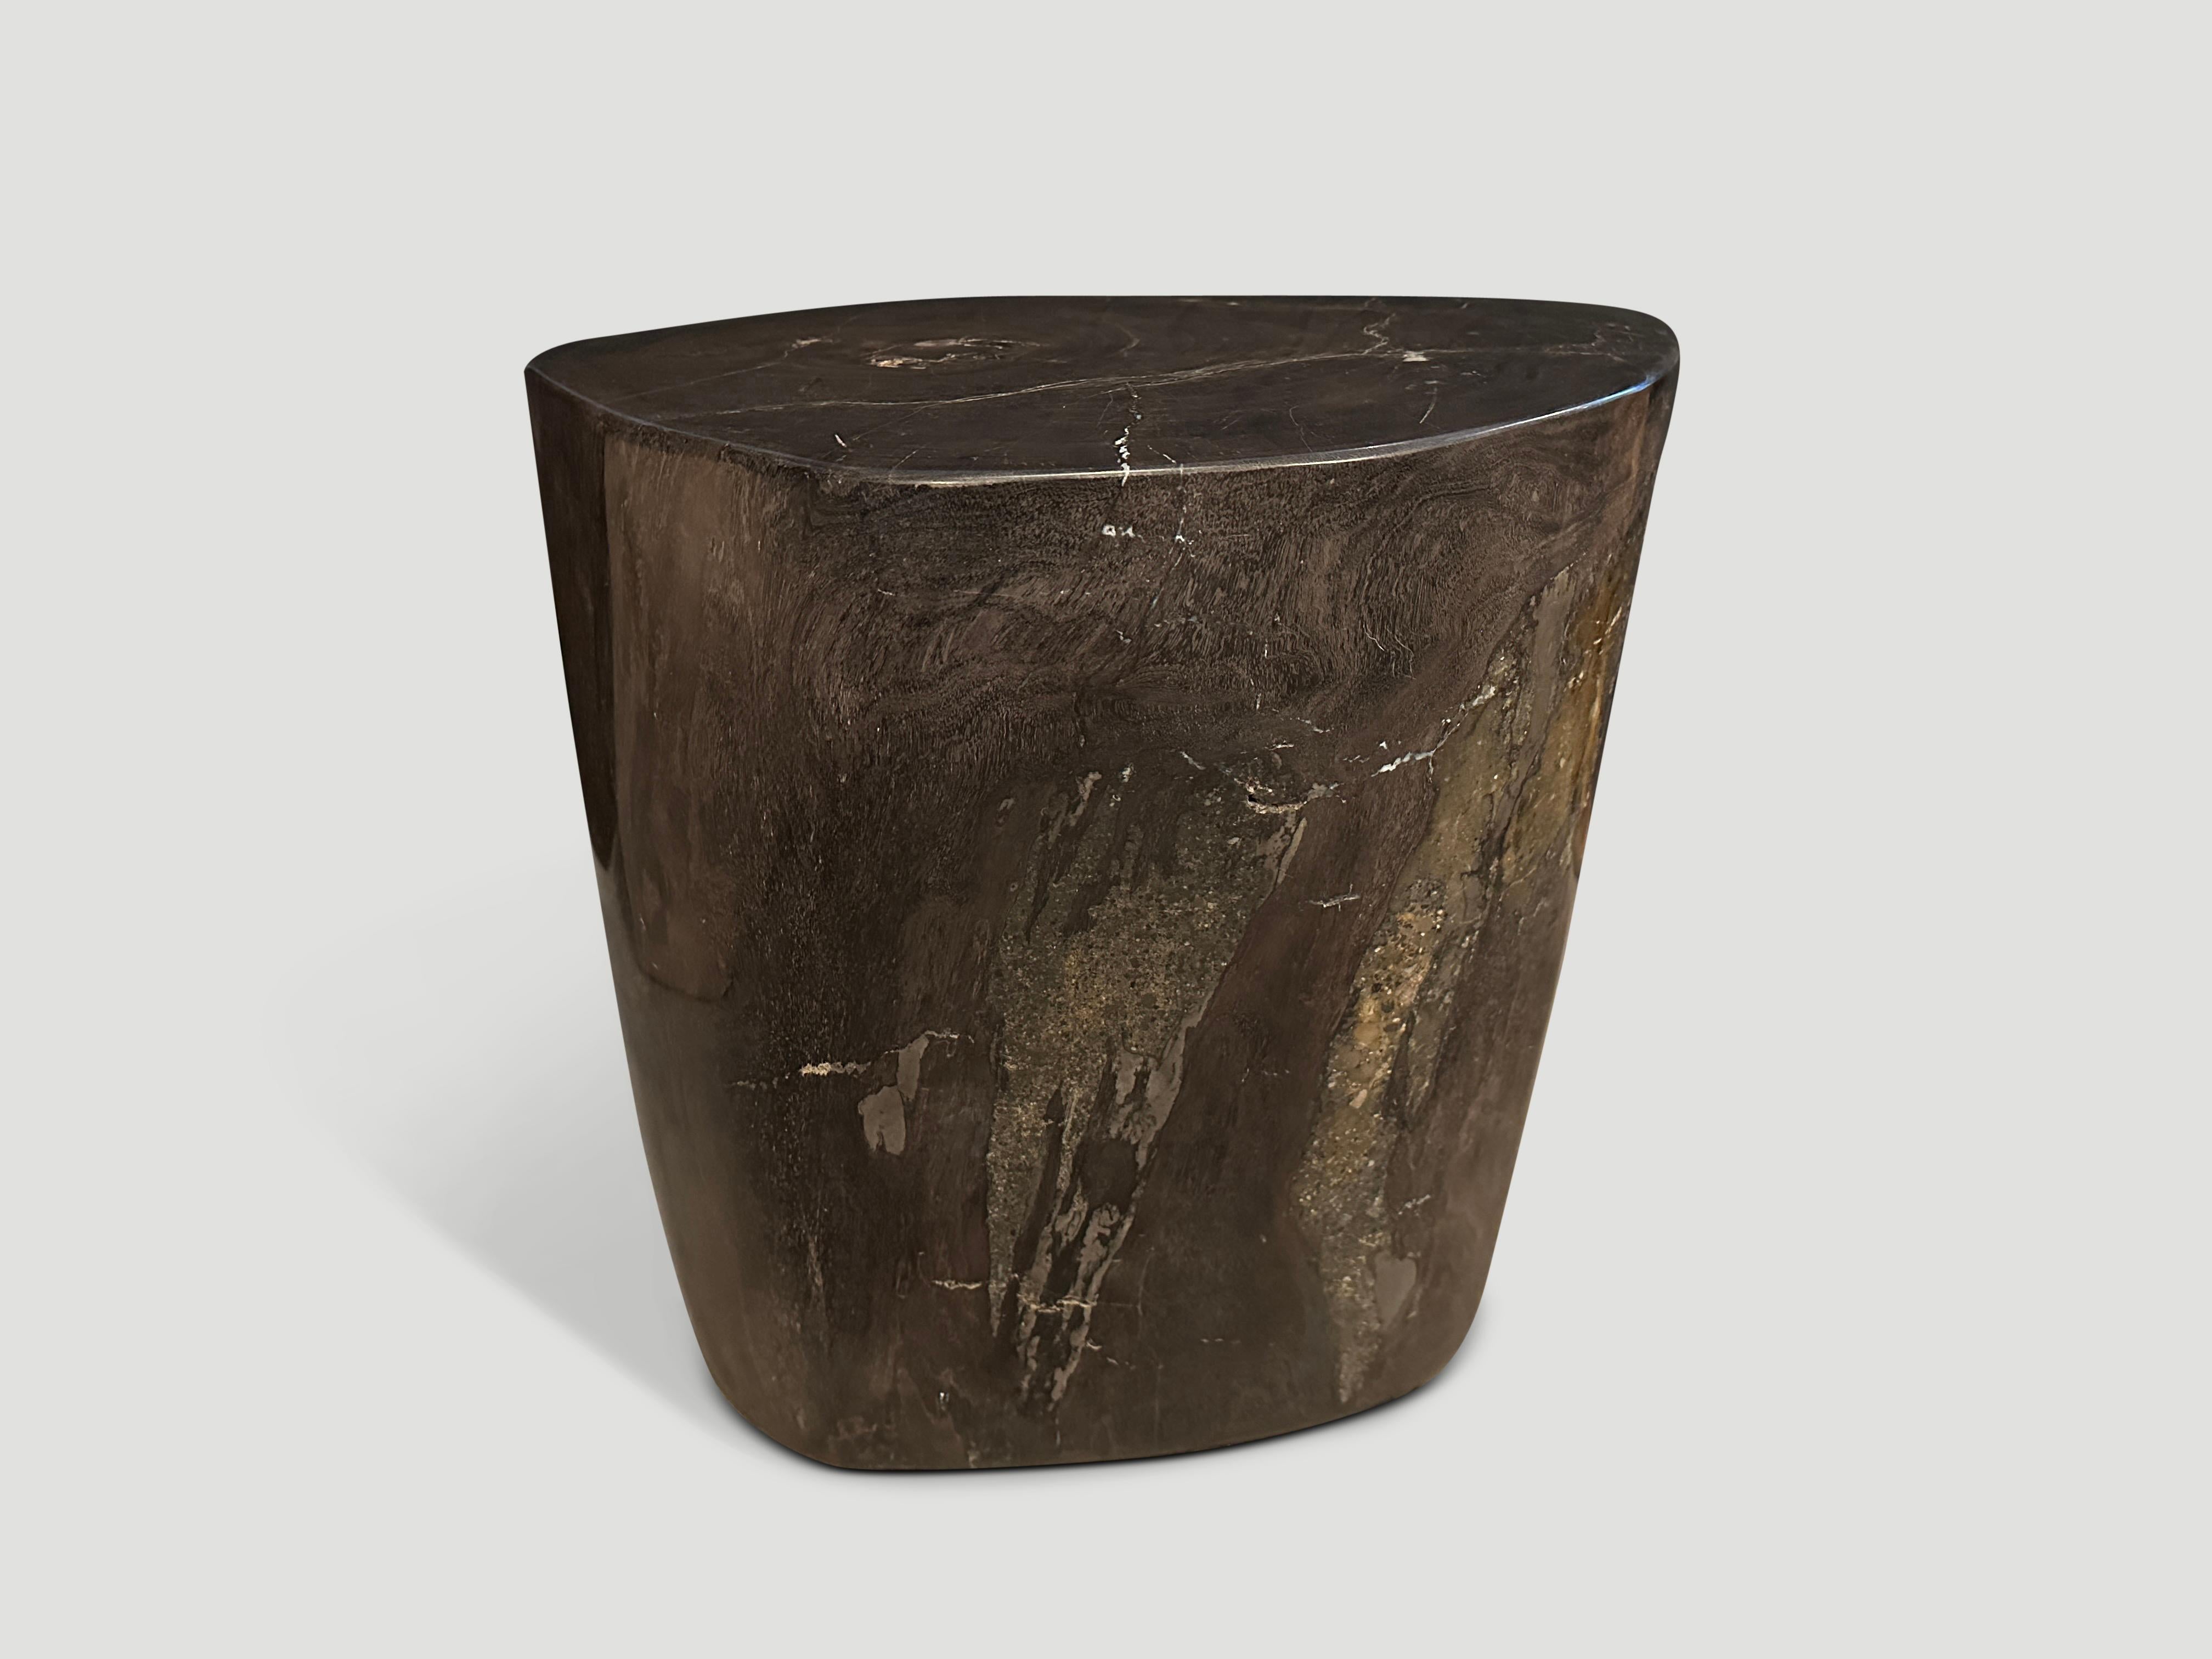 Impressive beautiful dark tones on this high quality petrified wood side table. It’s fascinating how Mother Nature produces these stunning 40 million year old petrified teak logs with such contrasting colors and natural patterns throughout. Modern